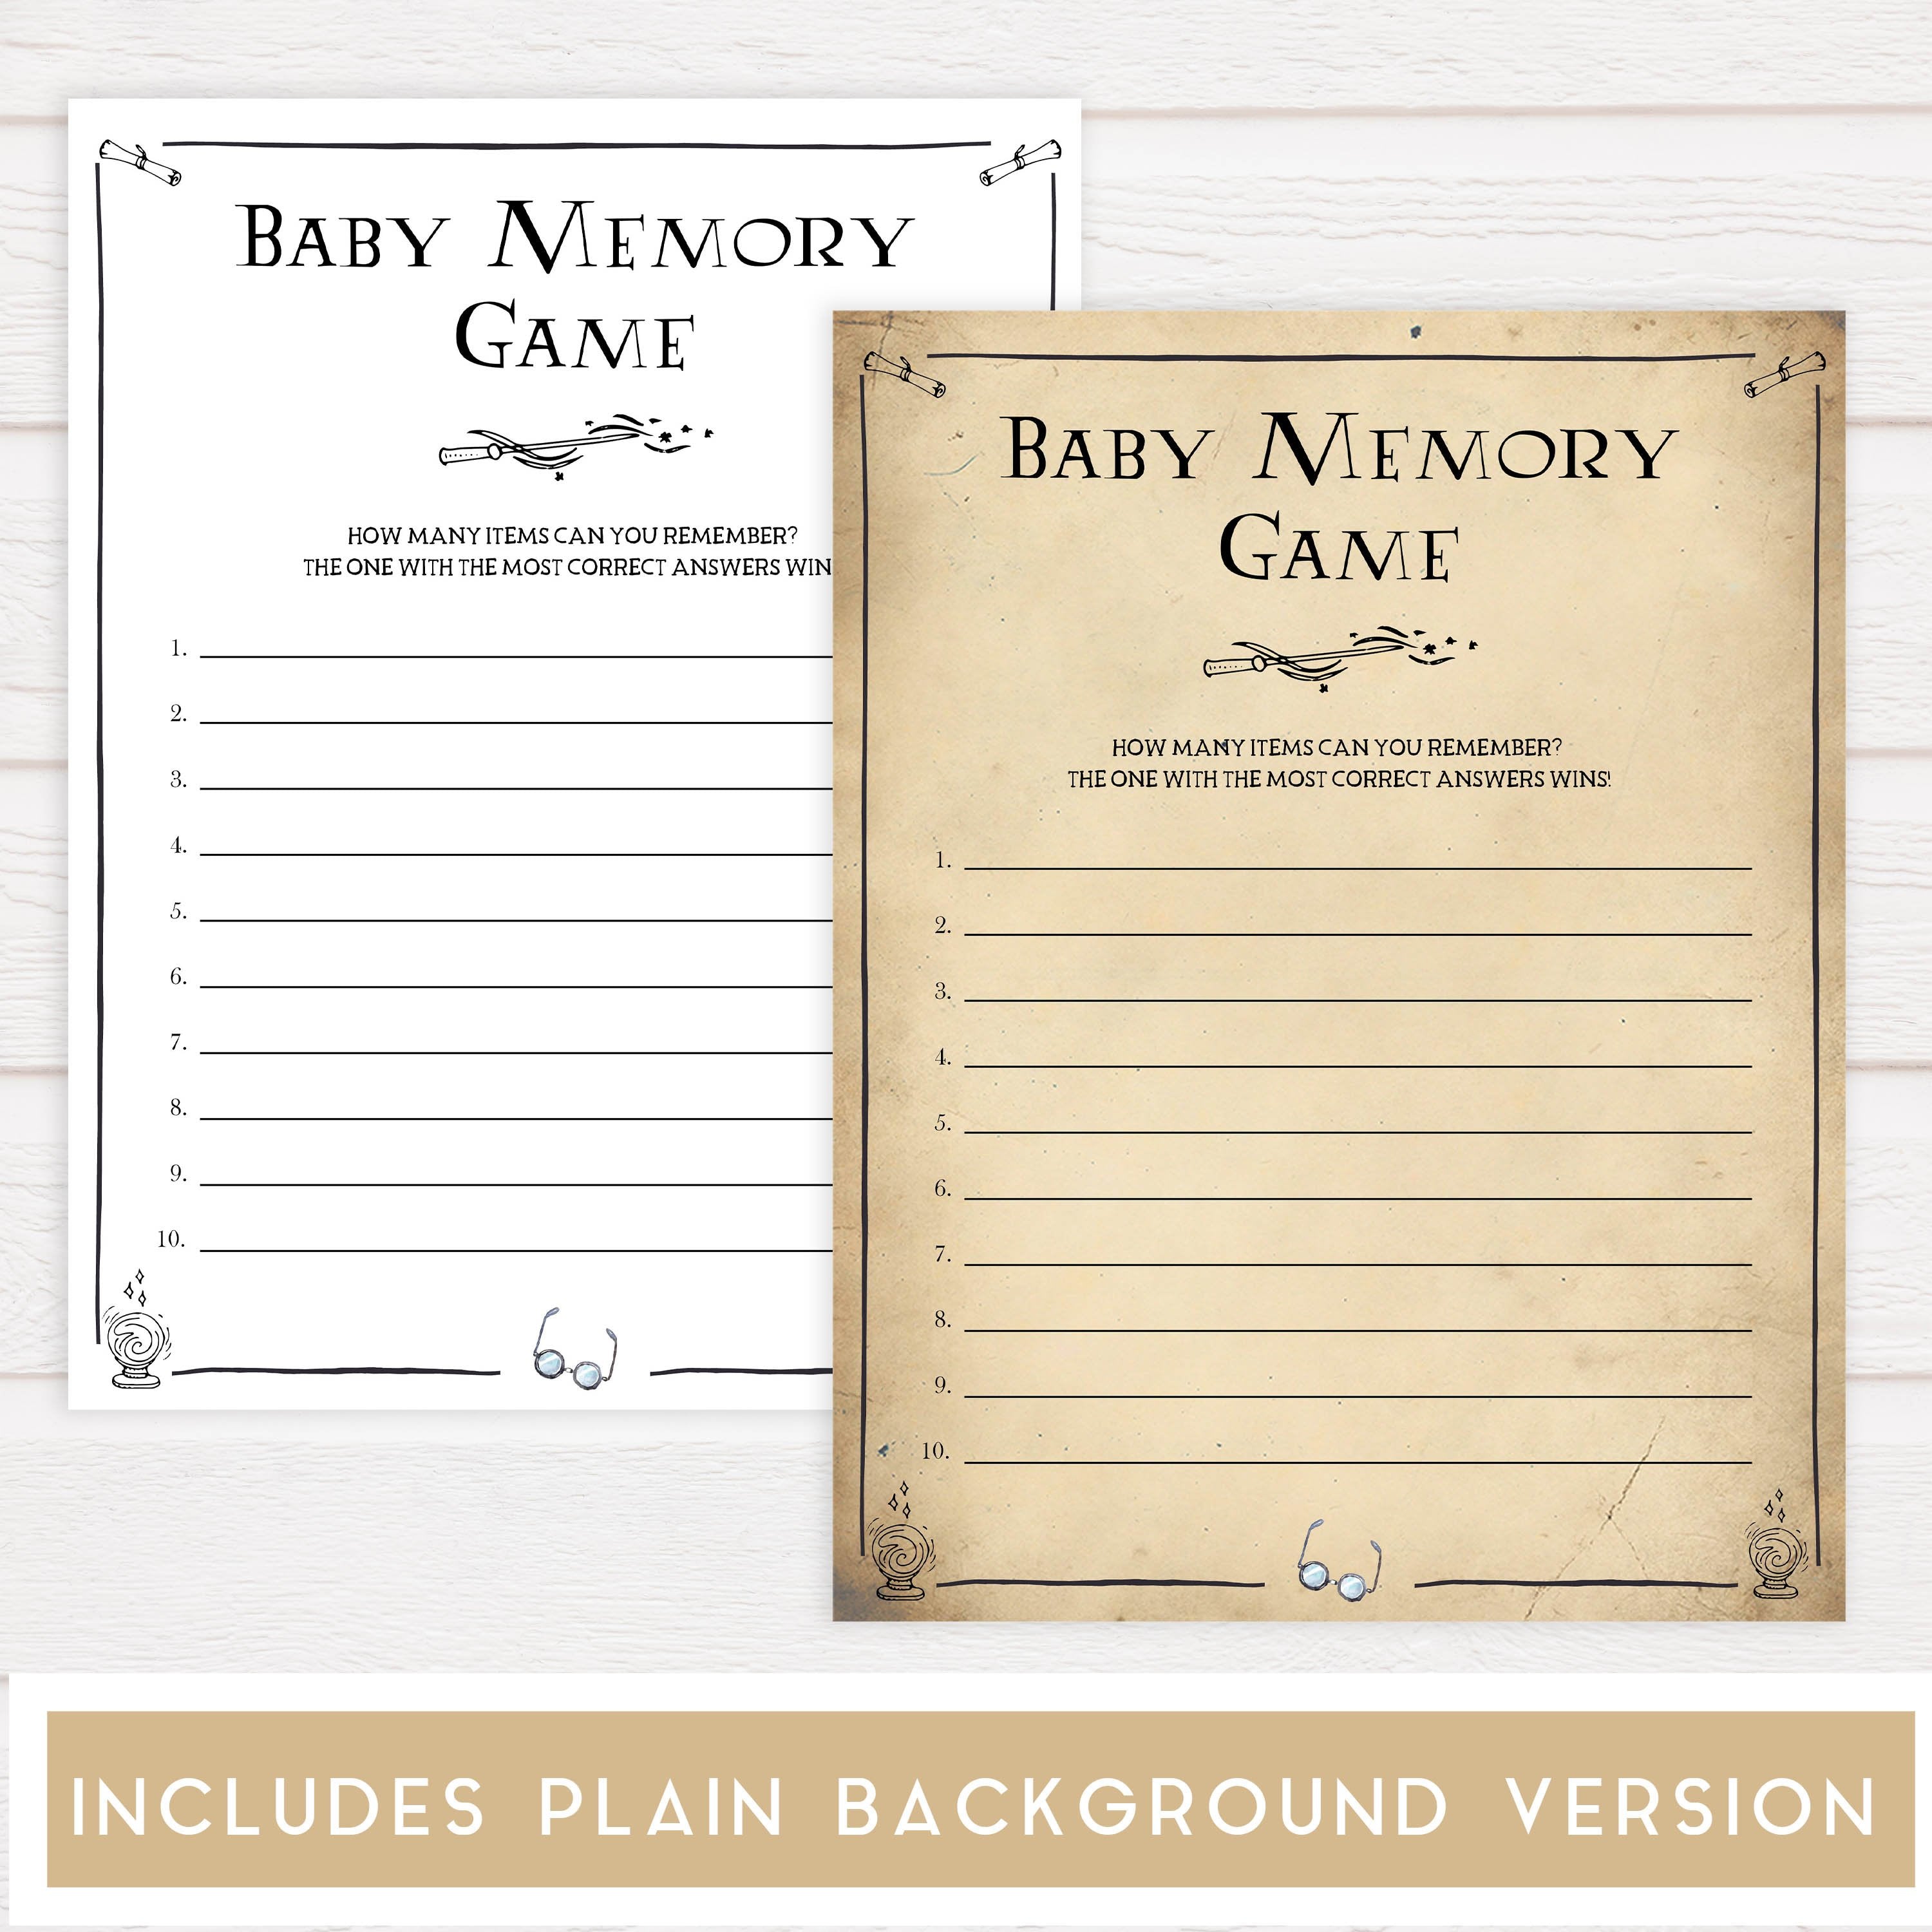 Baby Memory Game, Wizard baby shower games, printable baby shower games, Harry Potter baby games, Harry Potter baby shower, fun baby shower games,  fun baby ideas